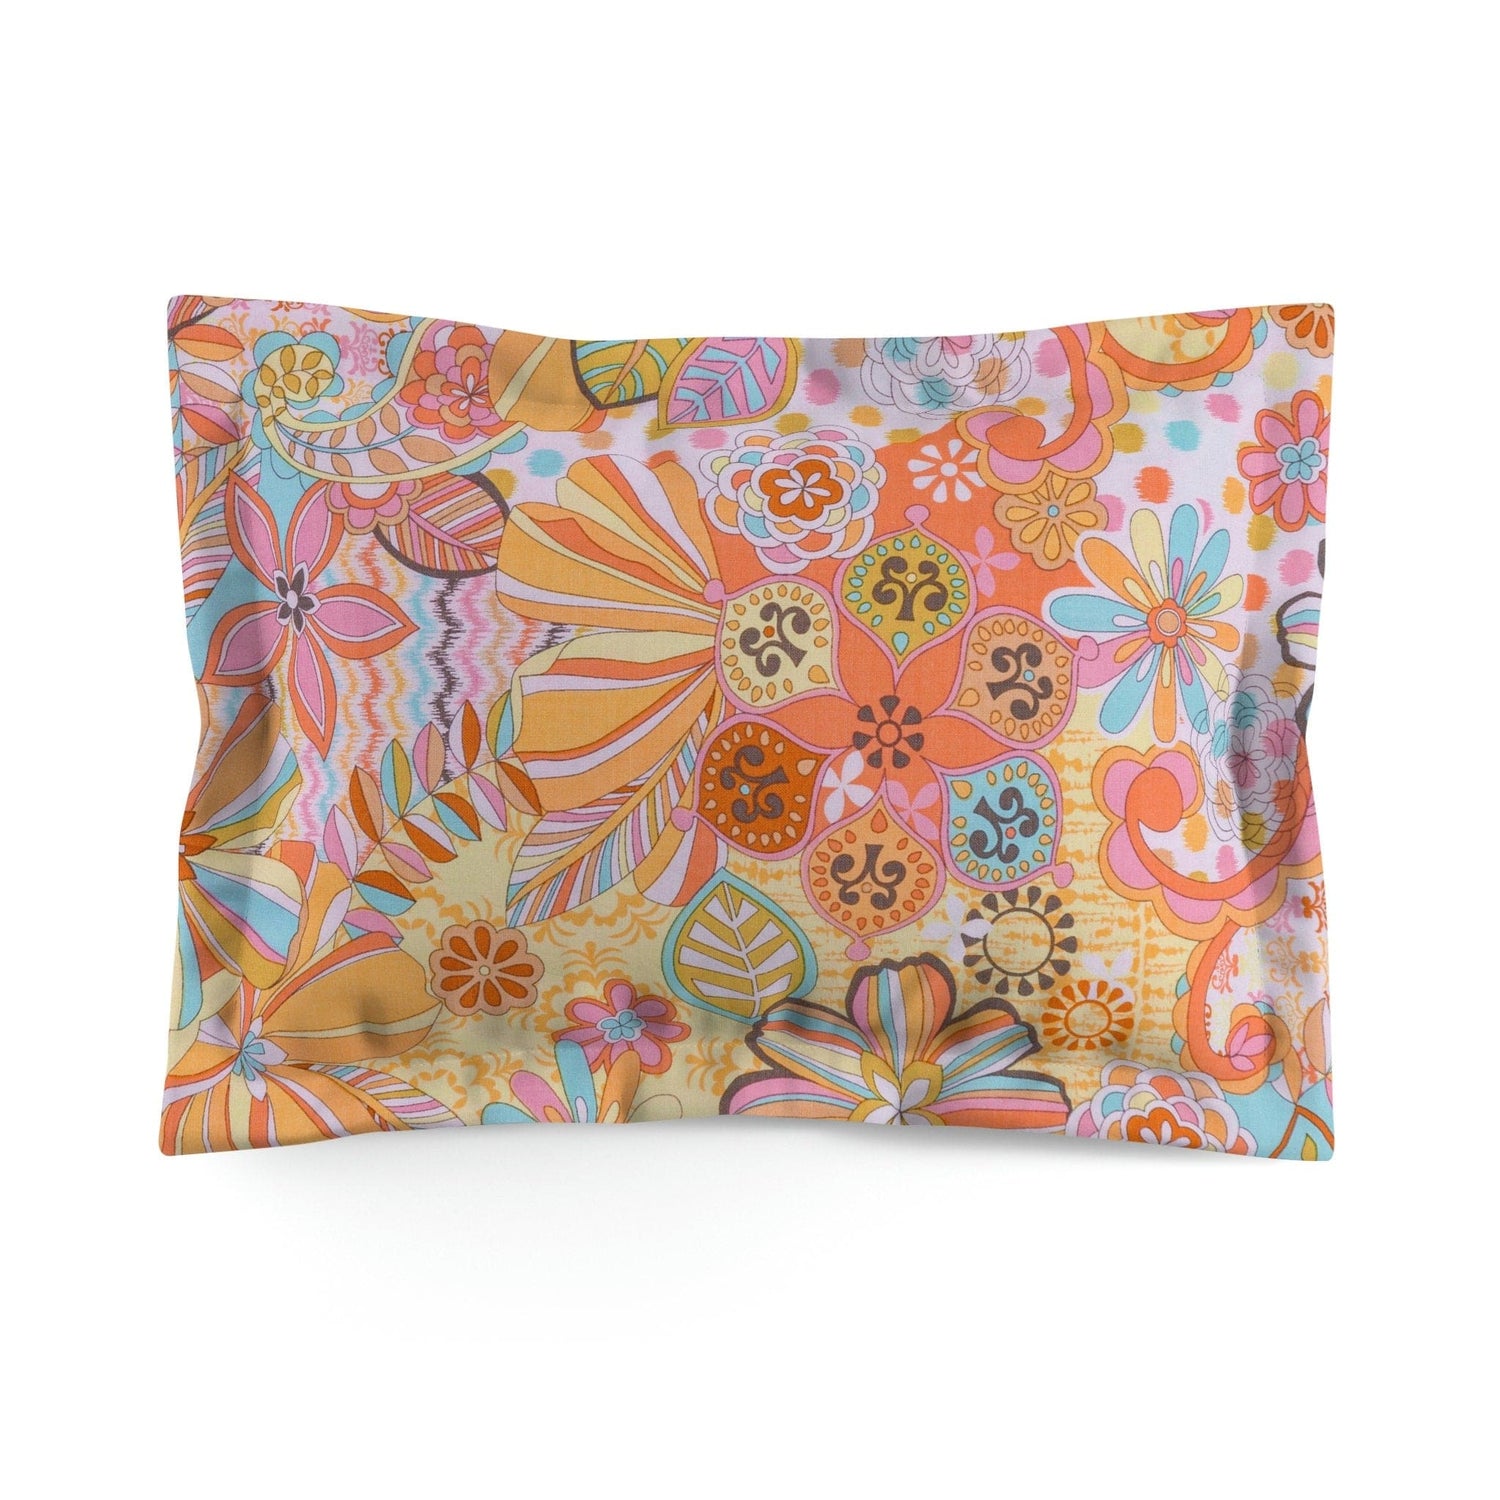 Kate McEnroe New York Retro Trippy Flower Power Pillow Sham, 70s Mid Mod Hippie Chic Floral Bedroom Decor with Groovy Orange, Yellow, and Blue PalettePillow Shams10510698804648143450